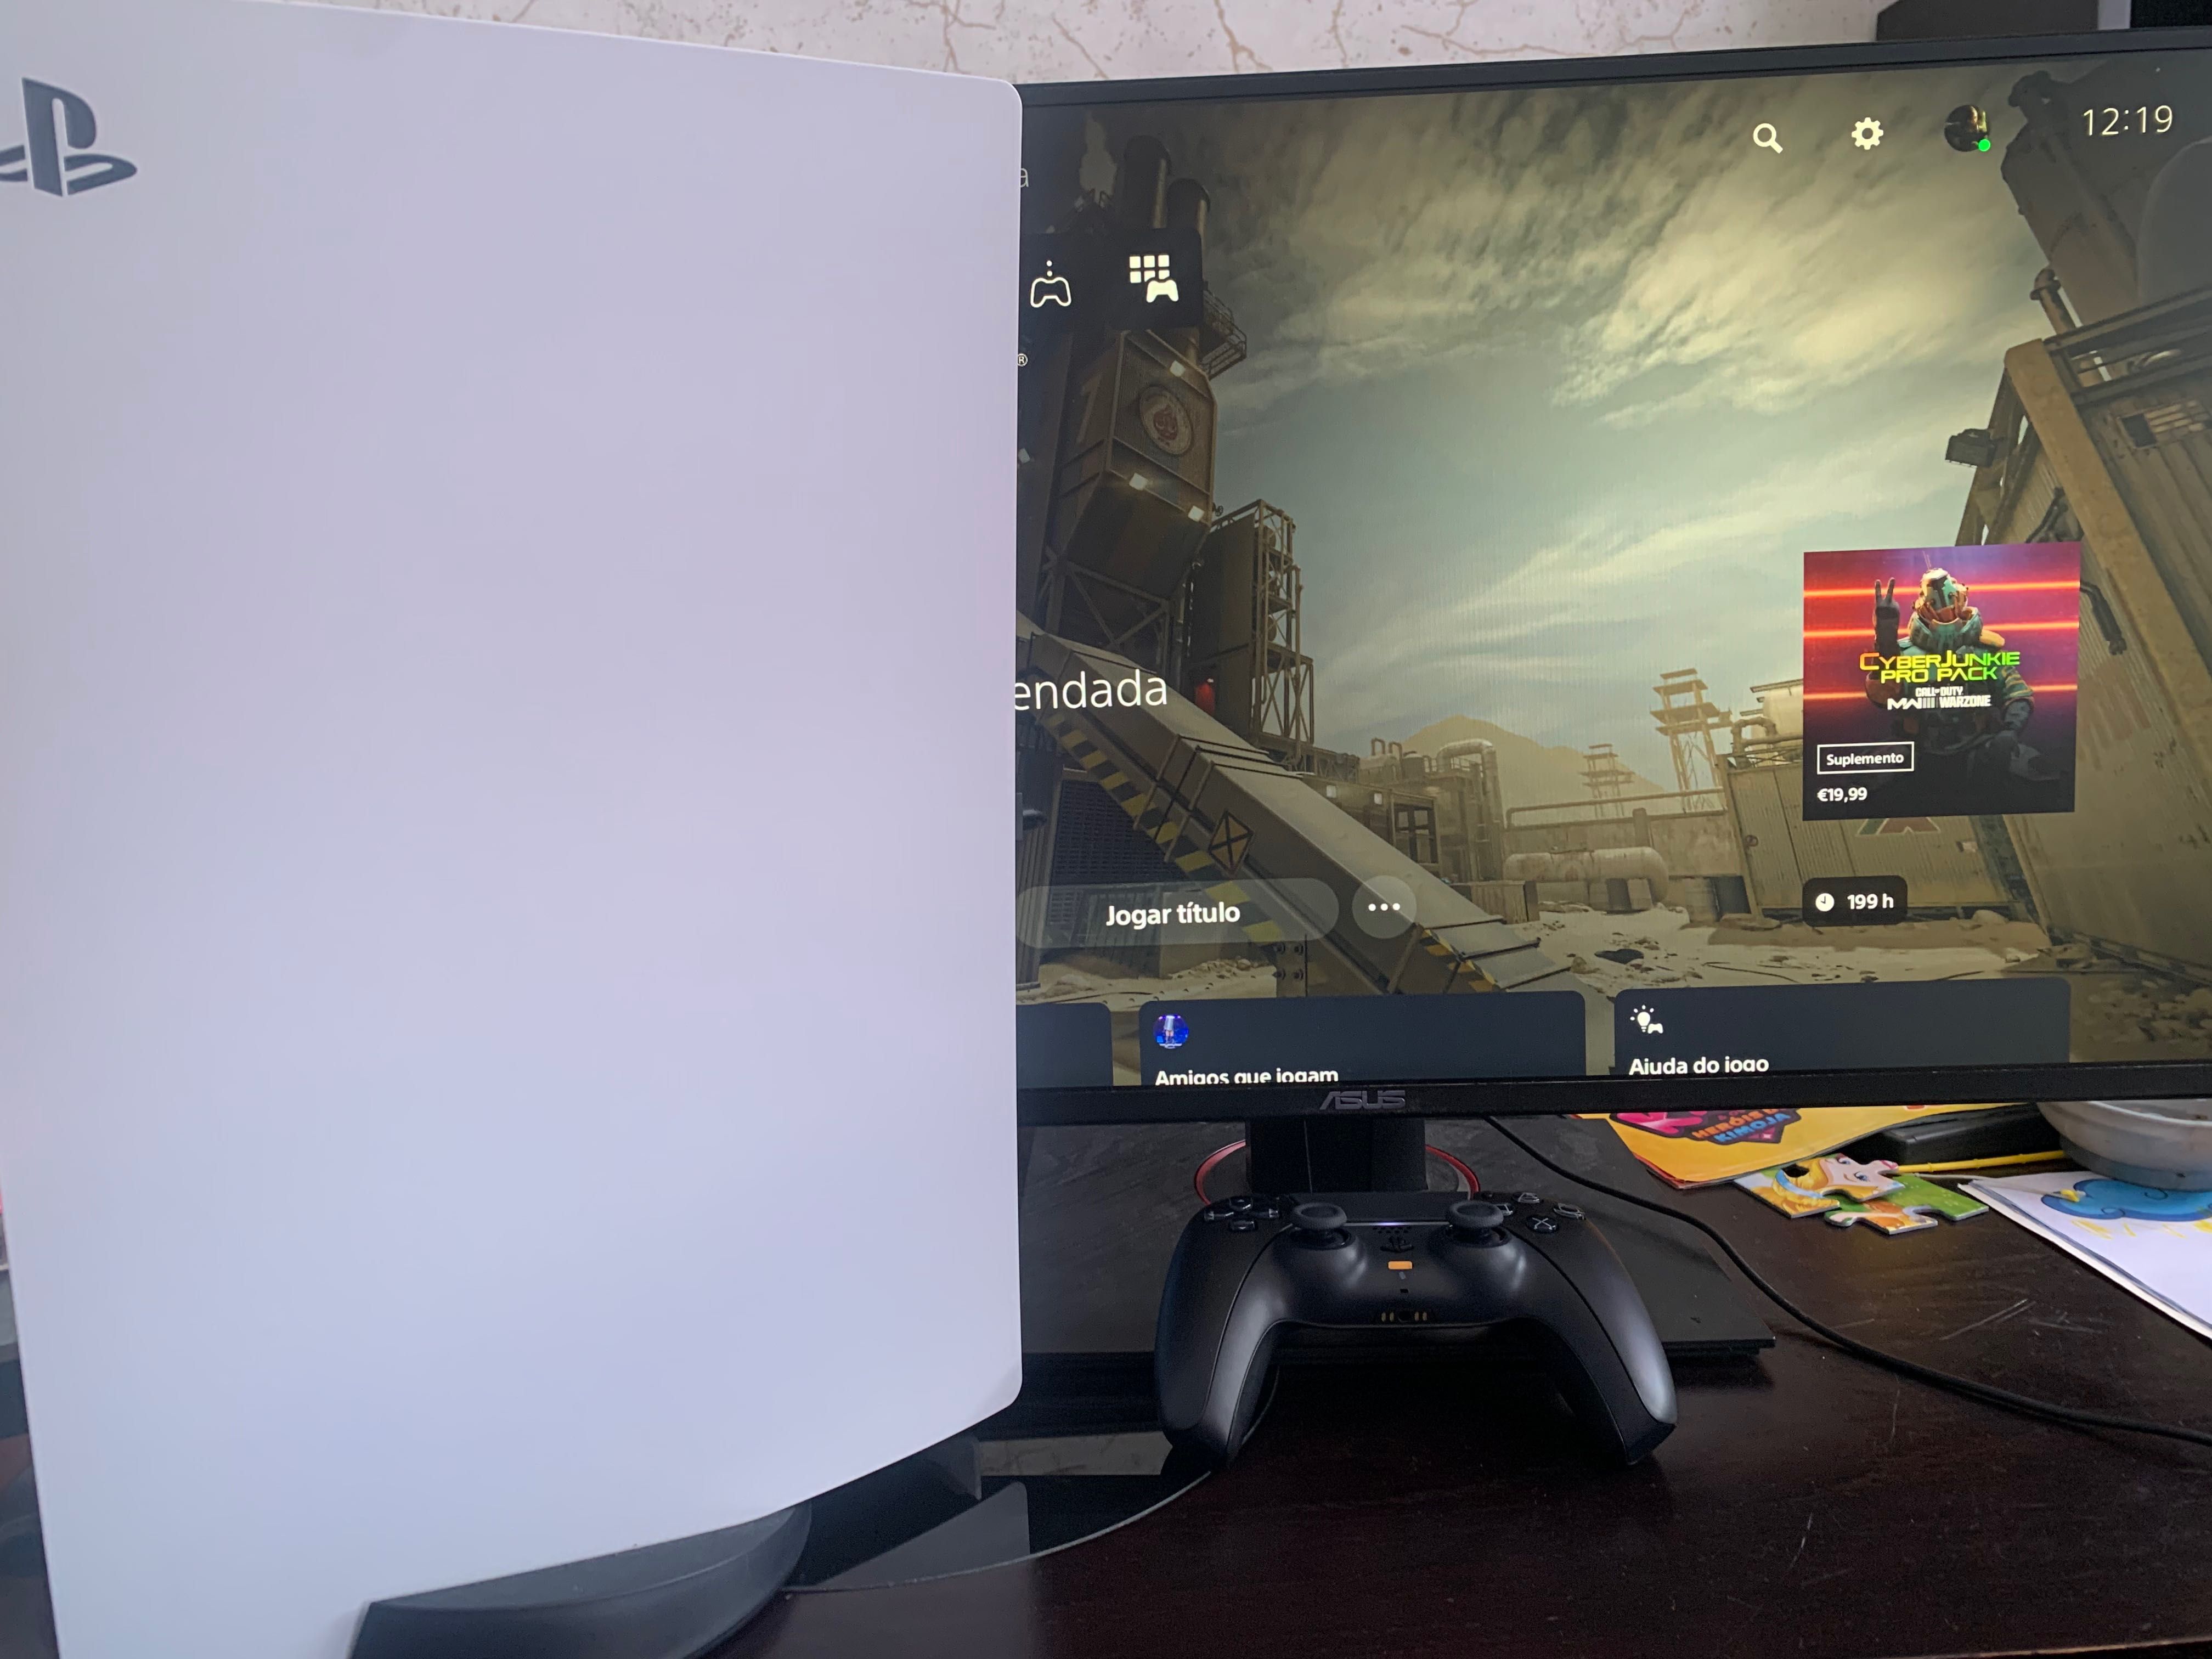 Ps5 standard monitor 144hz 1 ms